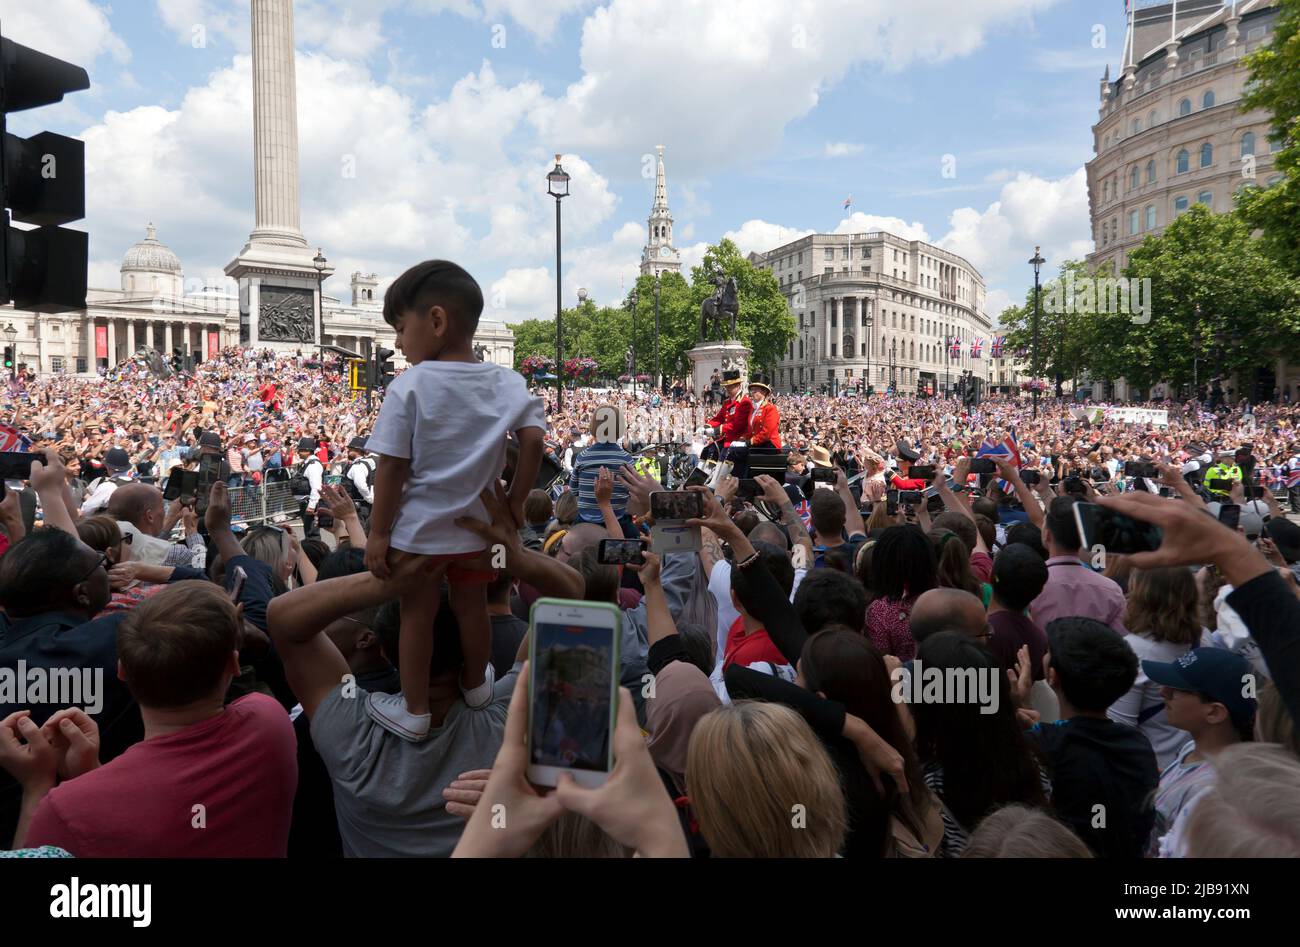 Prince Edward, Earl of Wessex and His Family, pass through a packed Trafalgar Square in an open topped carriage, on their way to Buckingham Place for the Queens Platinum Jubilee Celebrations Stock Photo